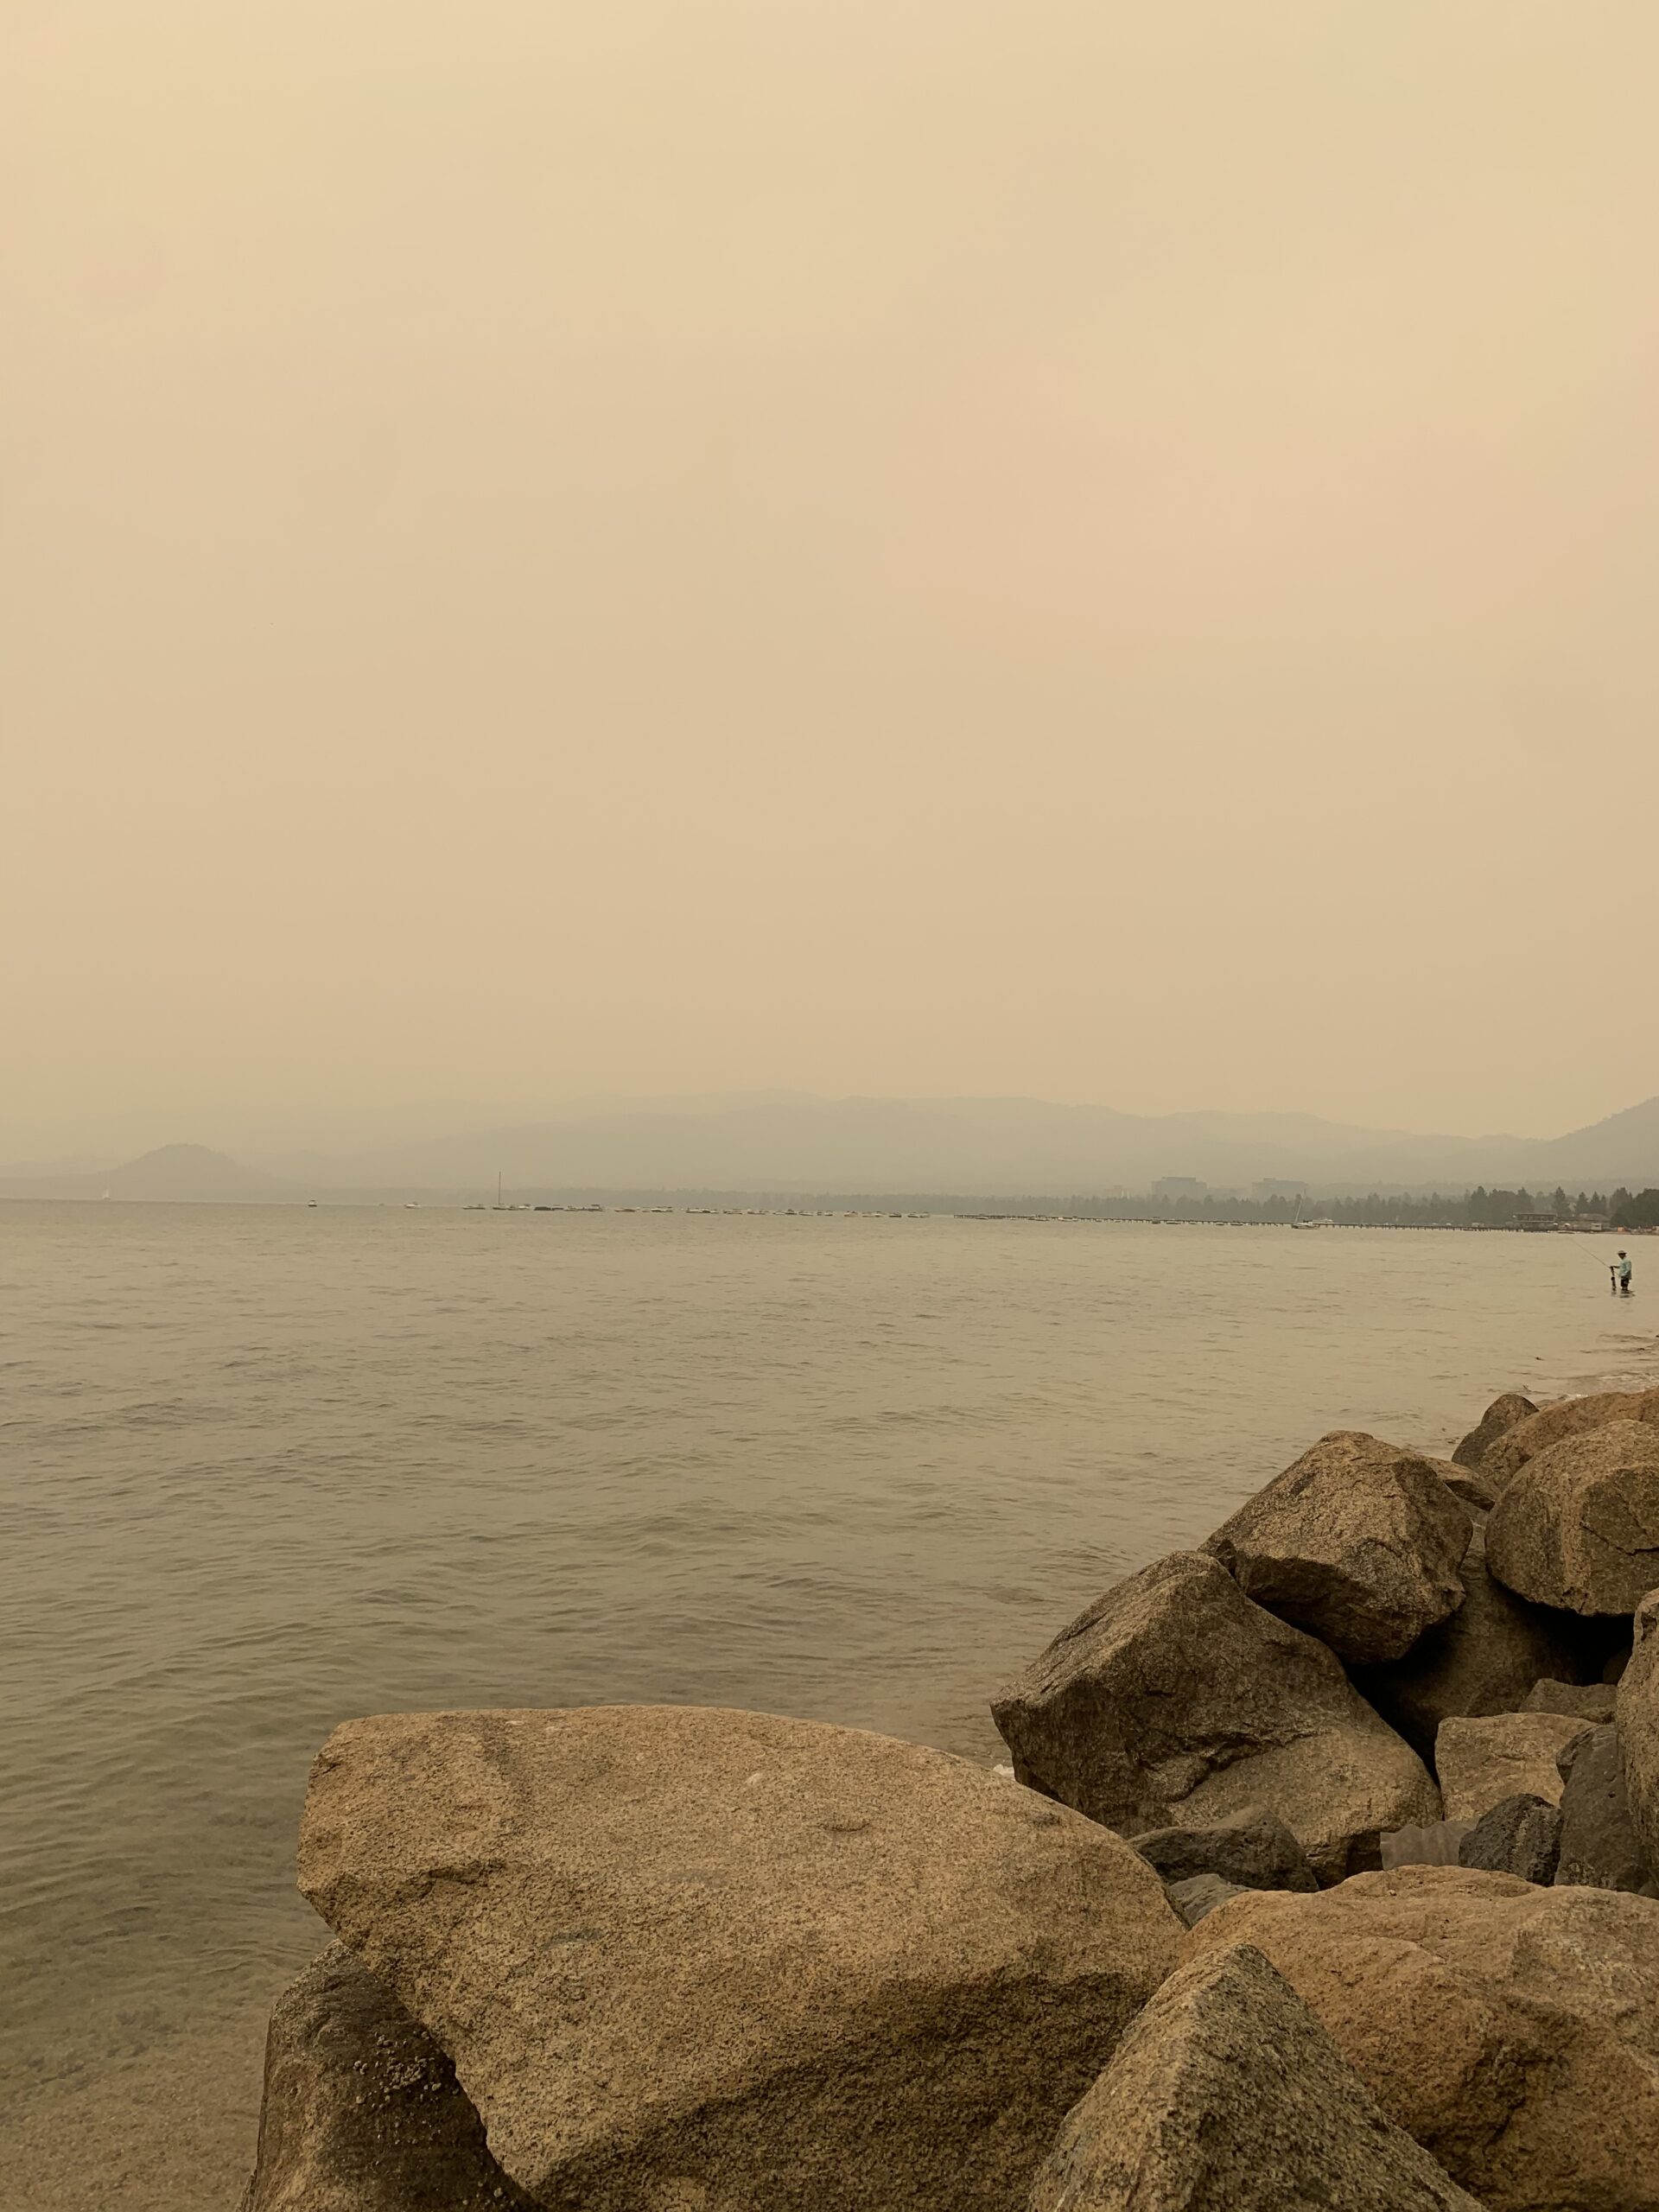 California Wildfire Smoke May Have Killed Thousands